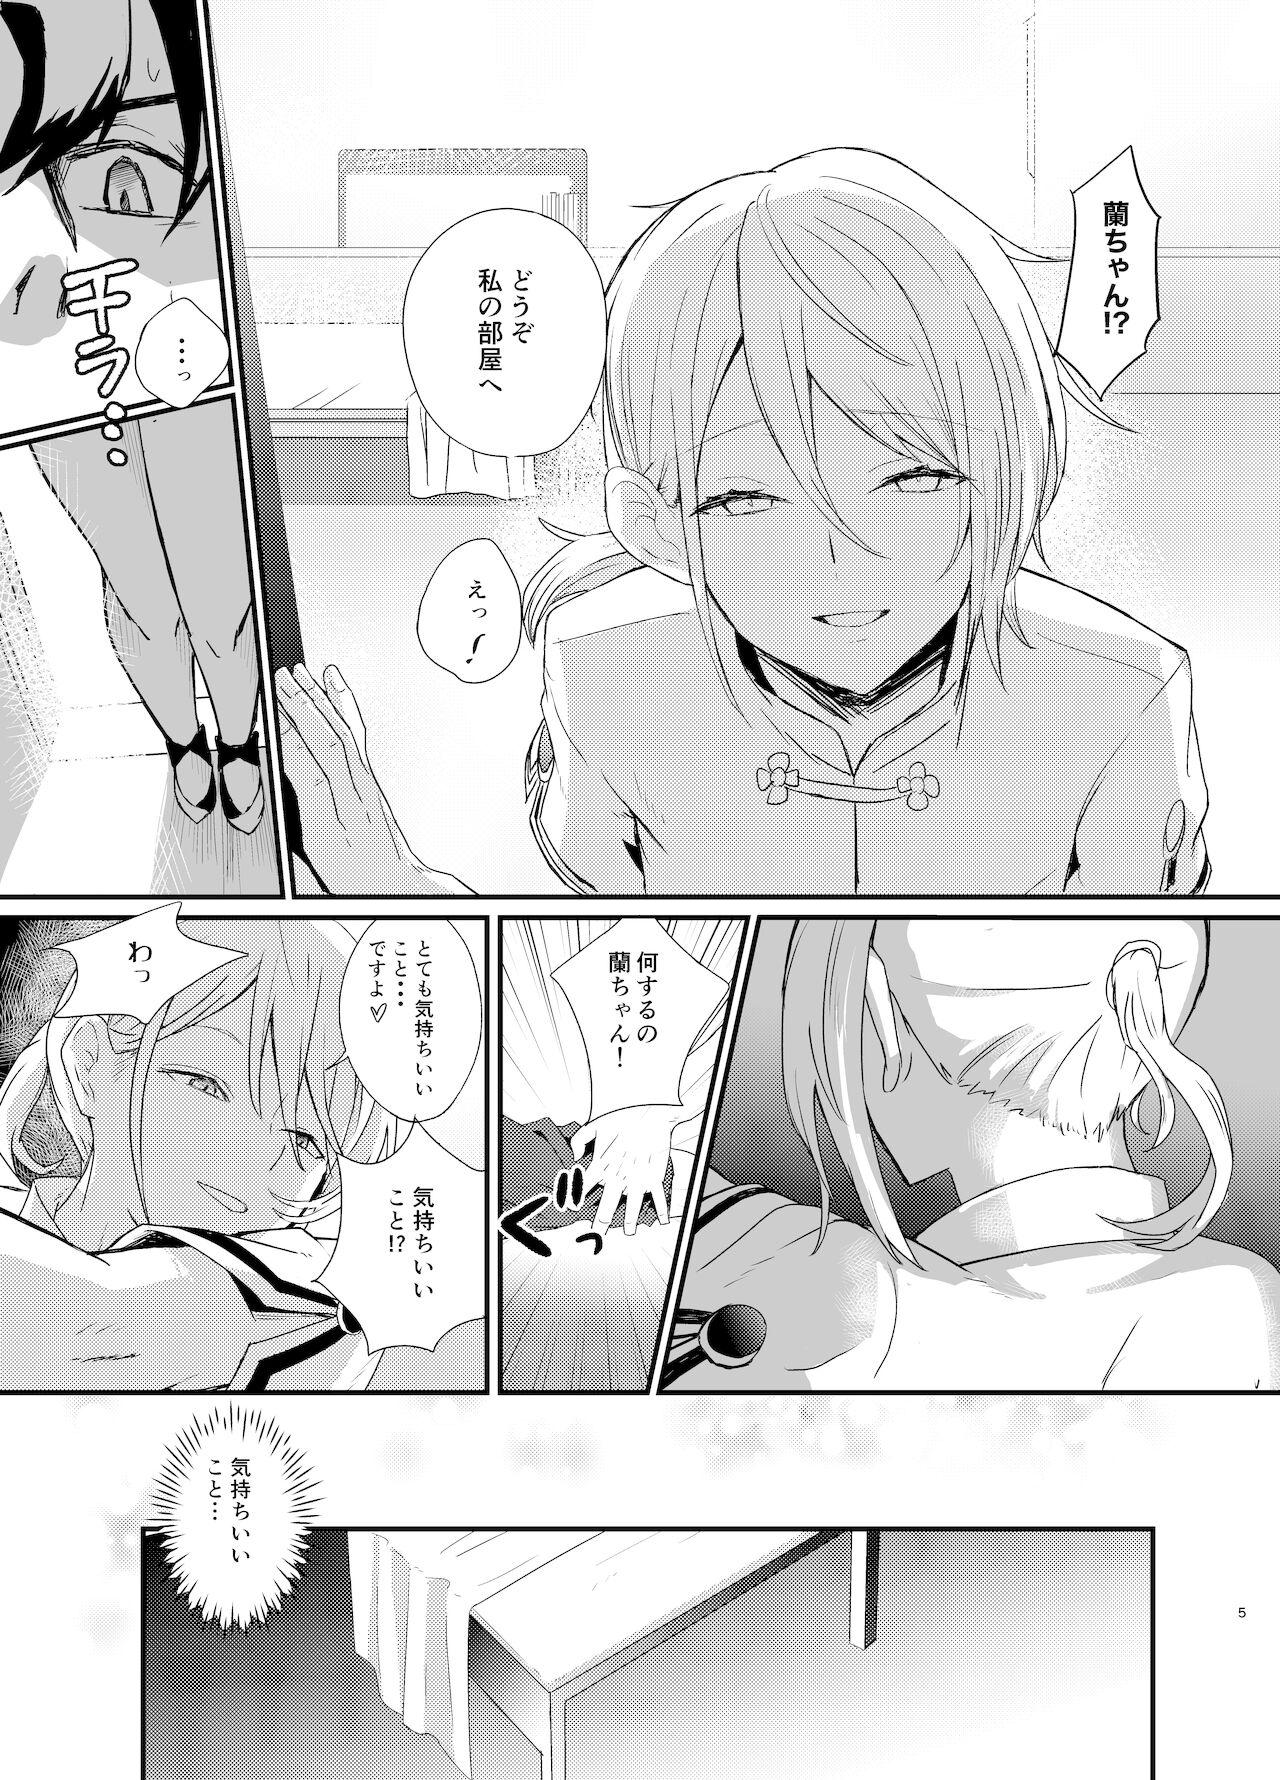 Parody 蘭陵王NTRゆうわく作戦! - Fate grand order Argentino - Page 6